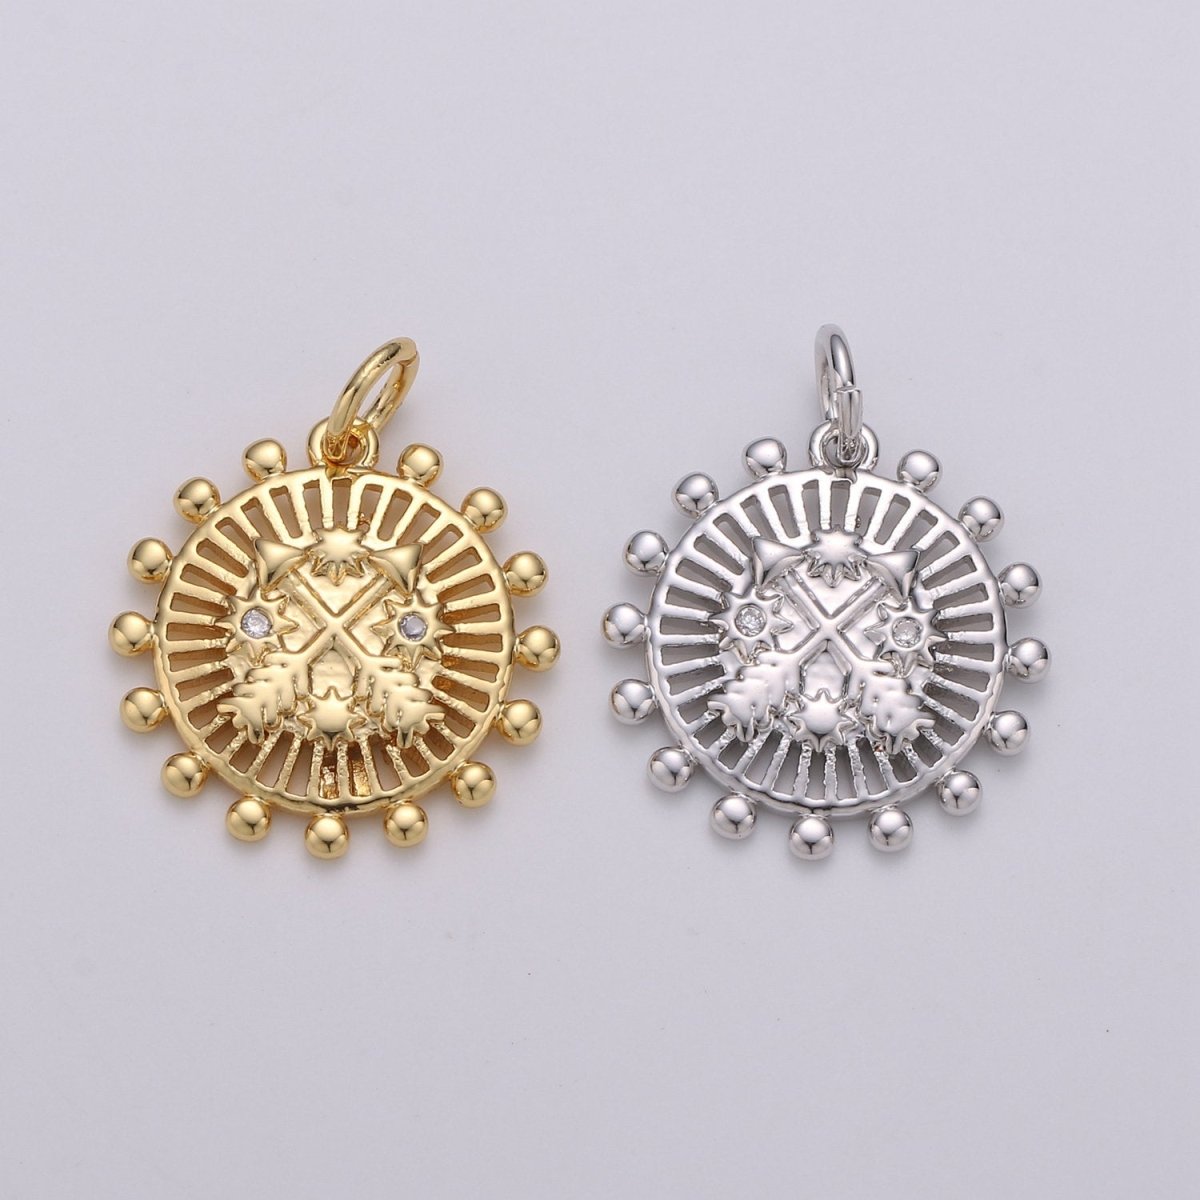 18x15mm 24k Gold Filled Coin Medallion, Arrow Charms, Round Pendant Silver Medallion for Bracelet Earring Necklace Making D-357 D-358 - DLUXCA